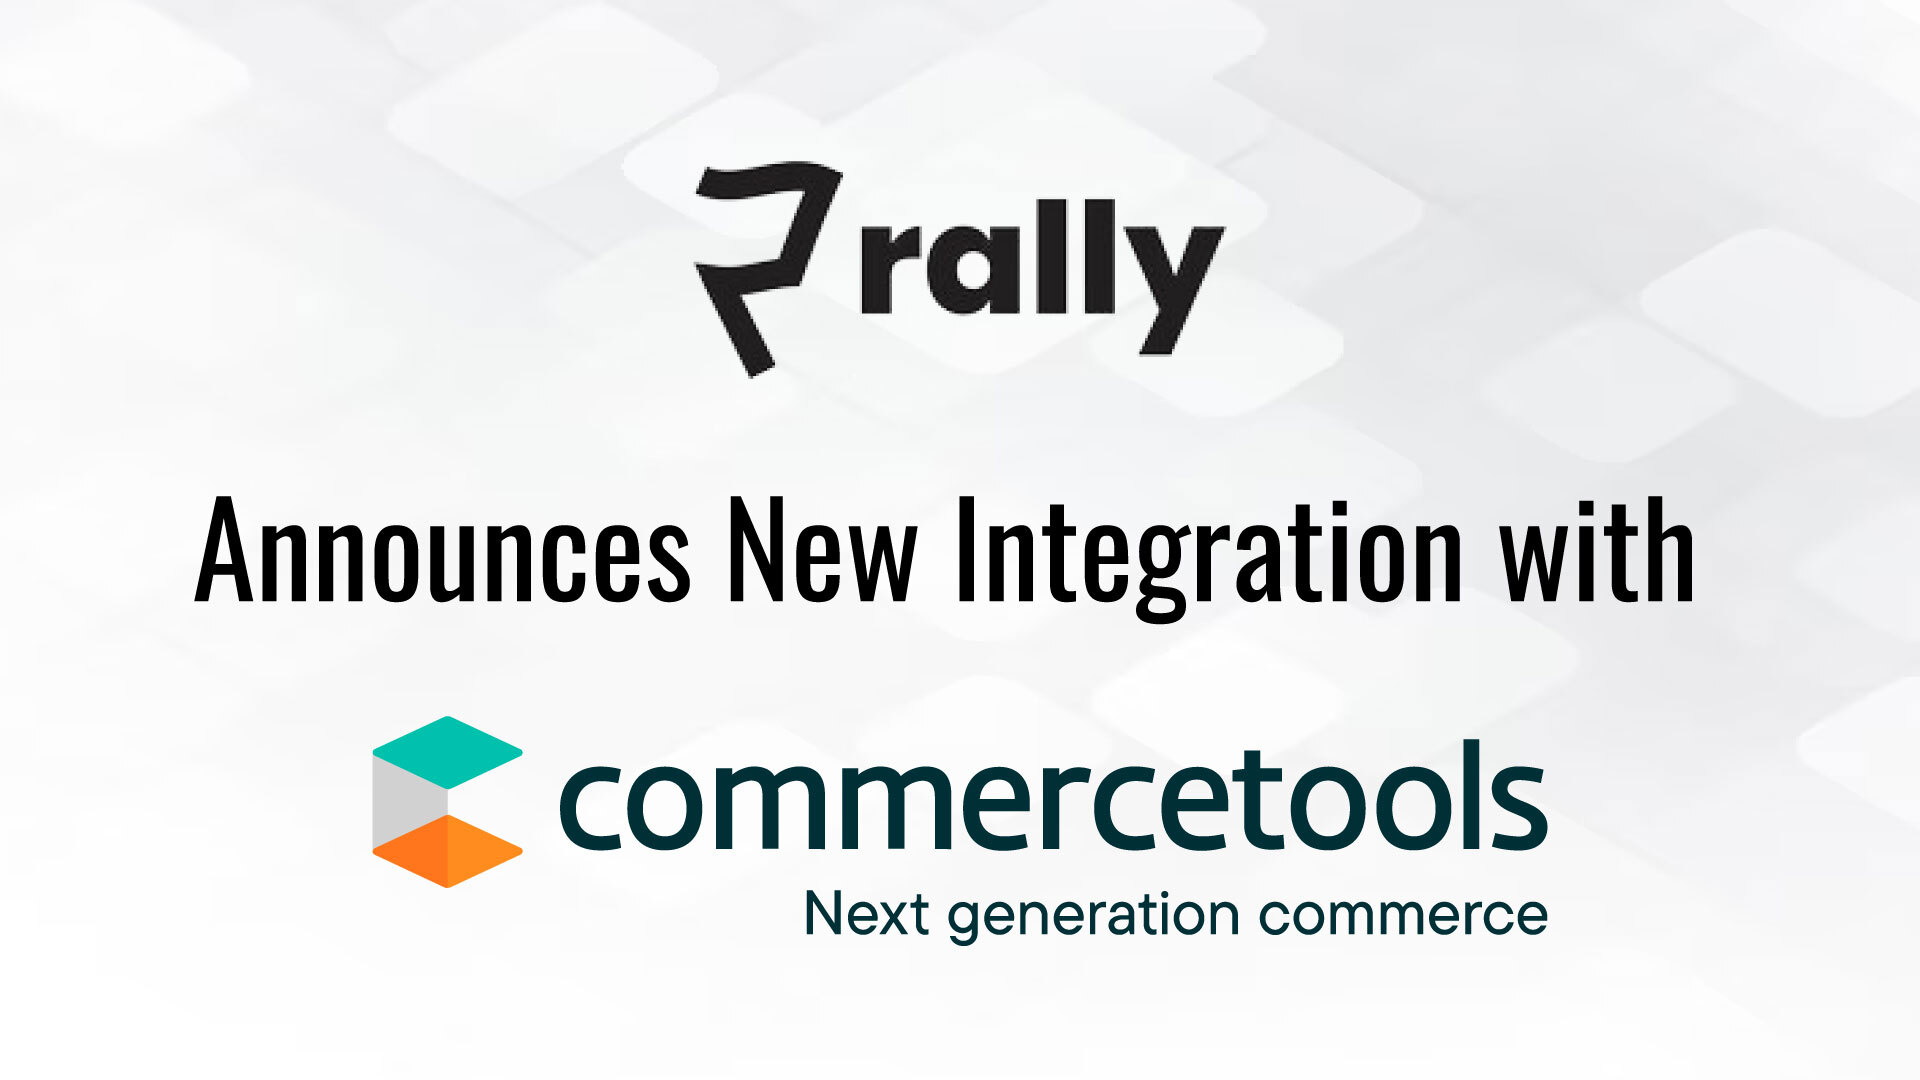 Rally Announces New Integration with Commercetools, the Leading Digital Commerce Software Provider